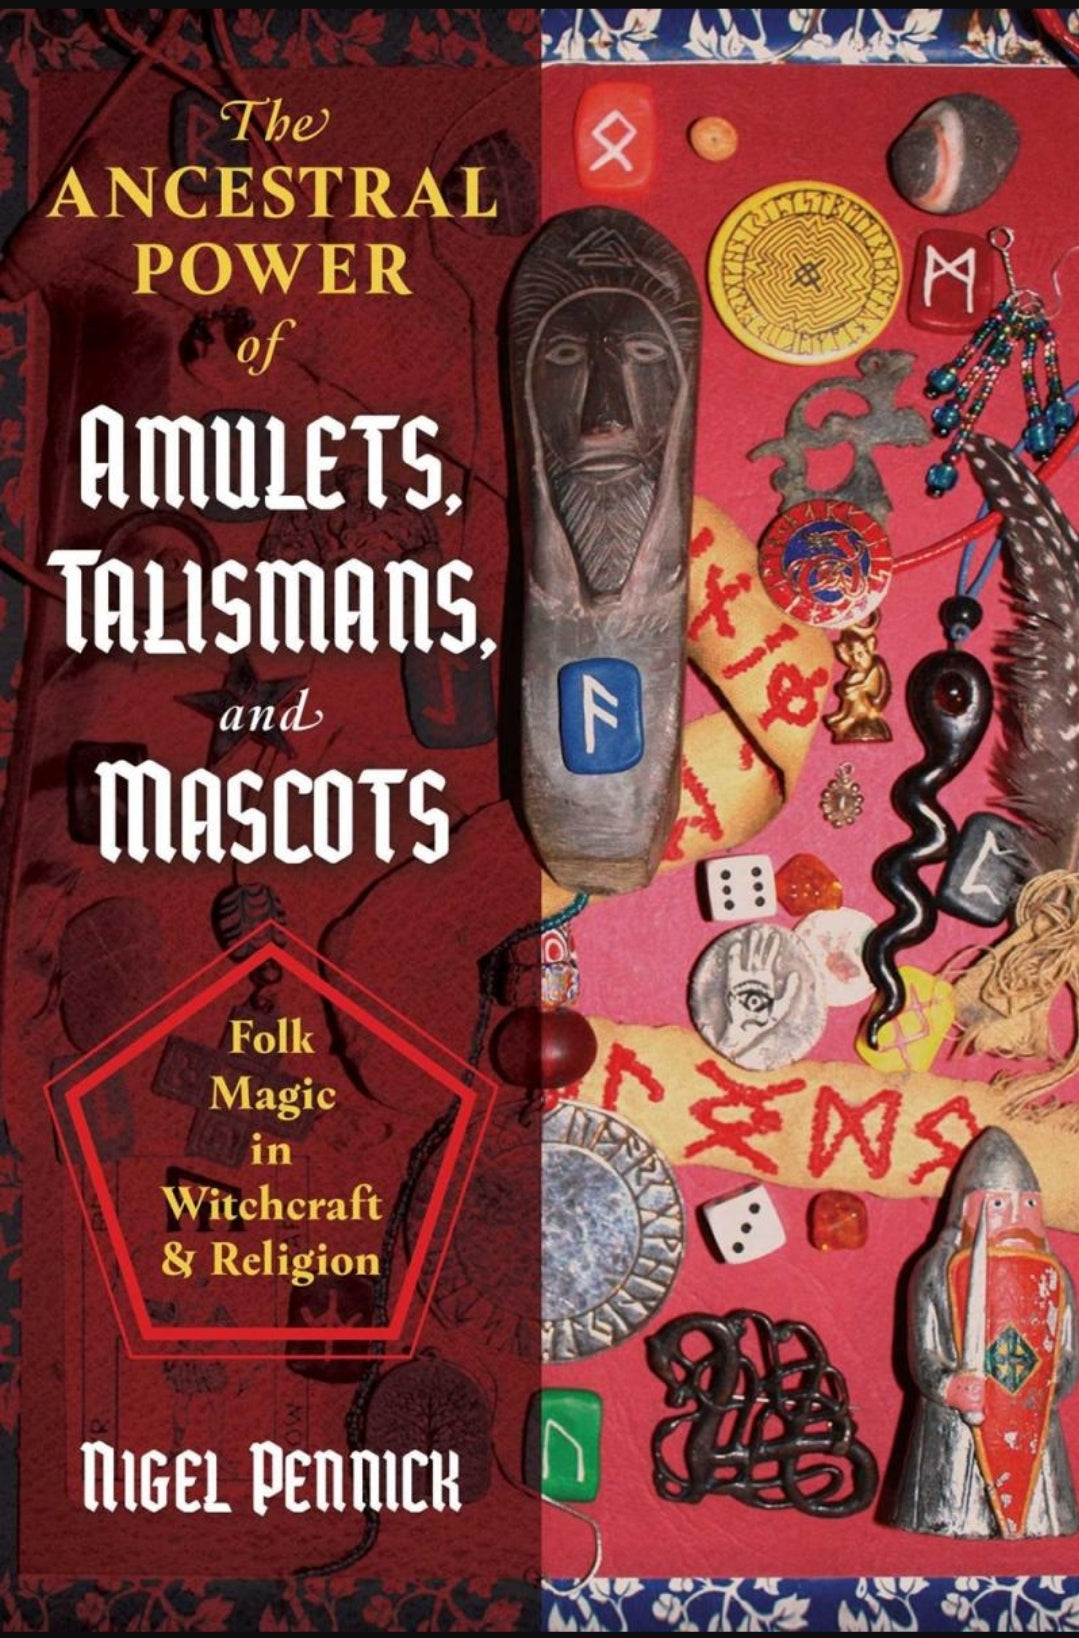 The Ancestral Power of Amulets, Talismans, and Mascots: Folk Magic in Witchcraft and Religion

by Nigel Pennick AUTHOR